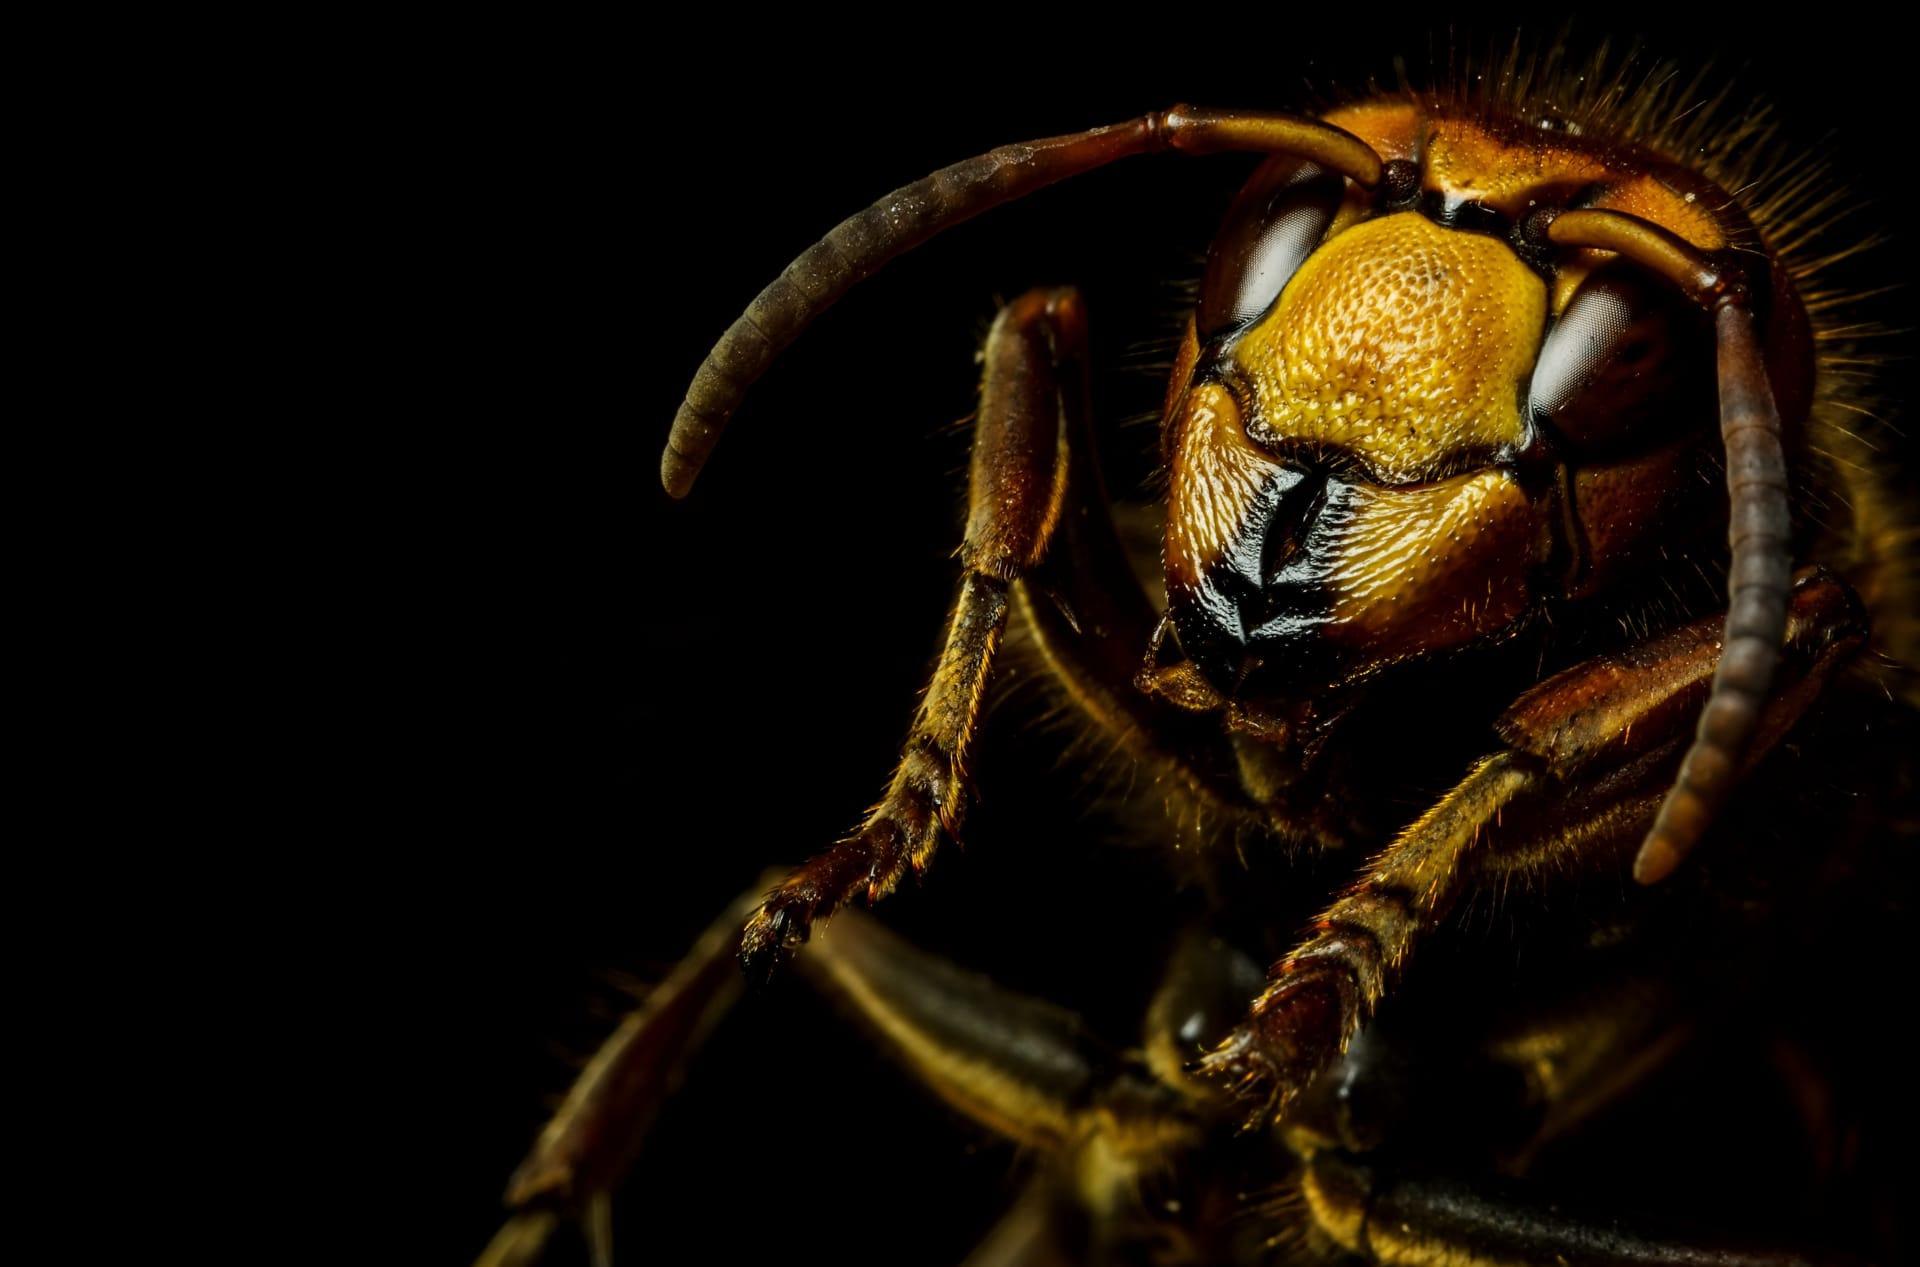 Murder hornets pictures